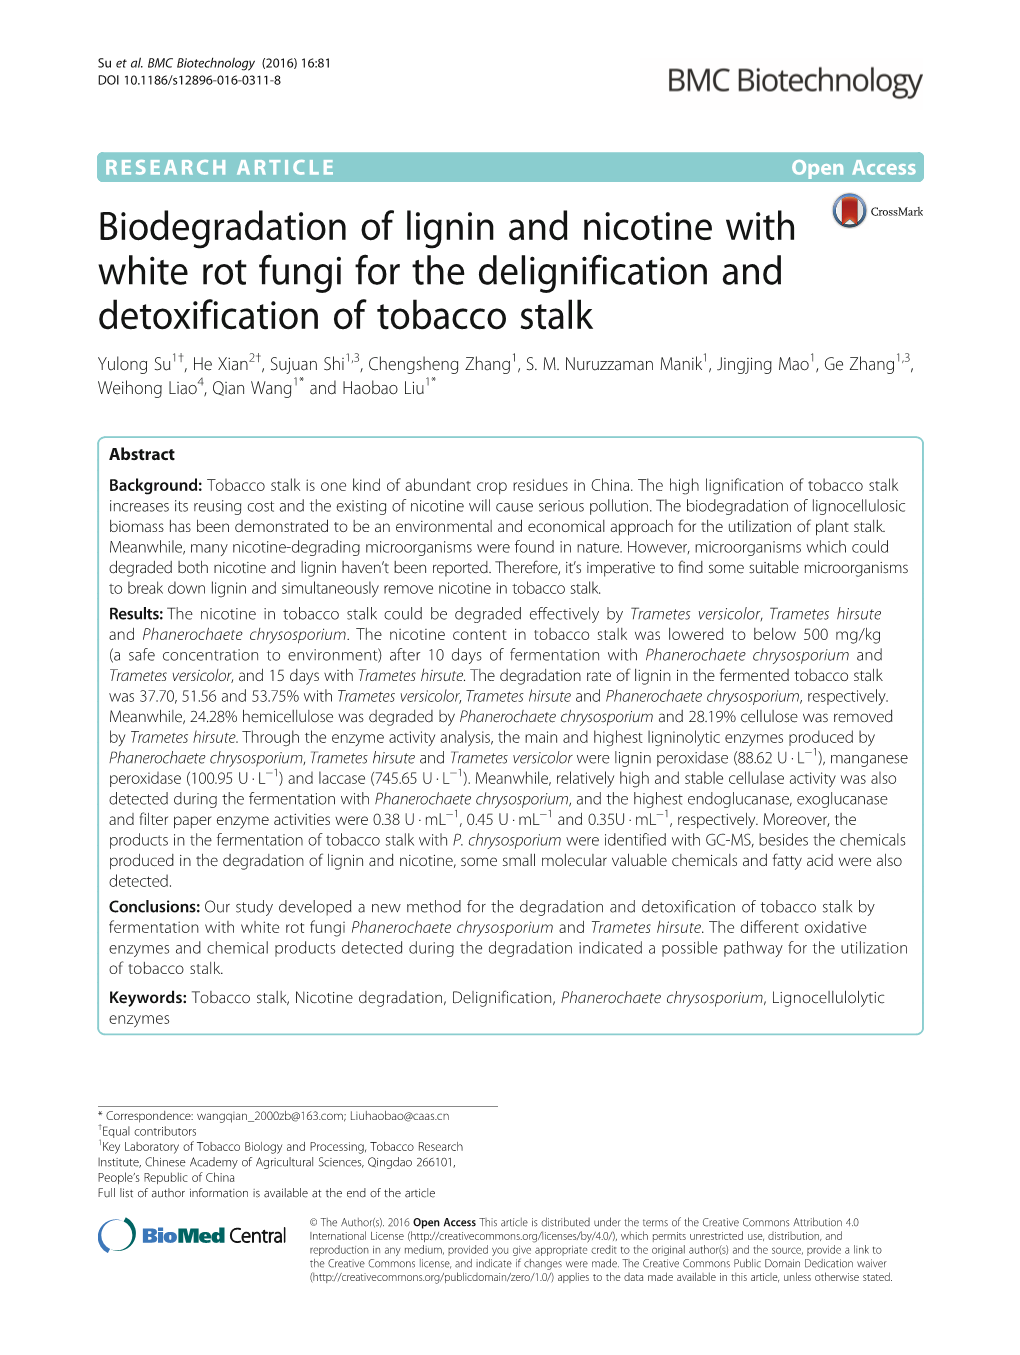 Biodegradation of Lignin and Nicotine with White Rot Fungi for The